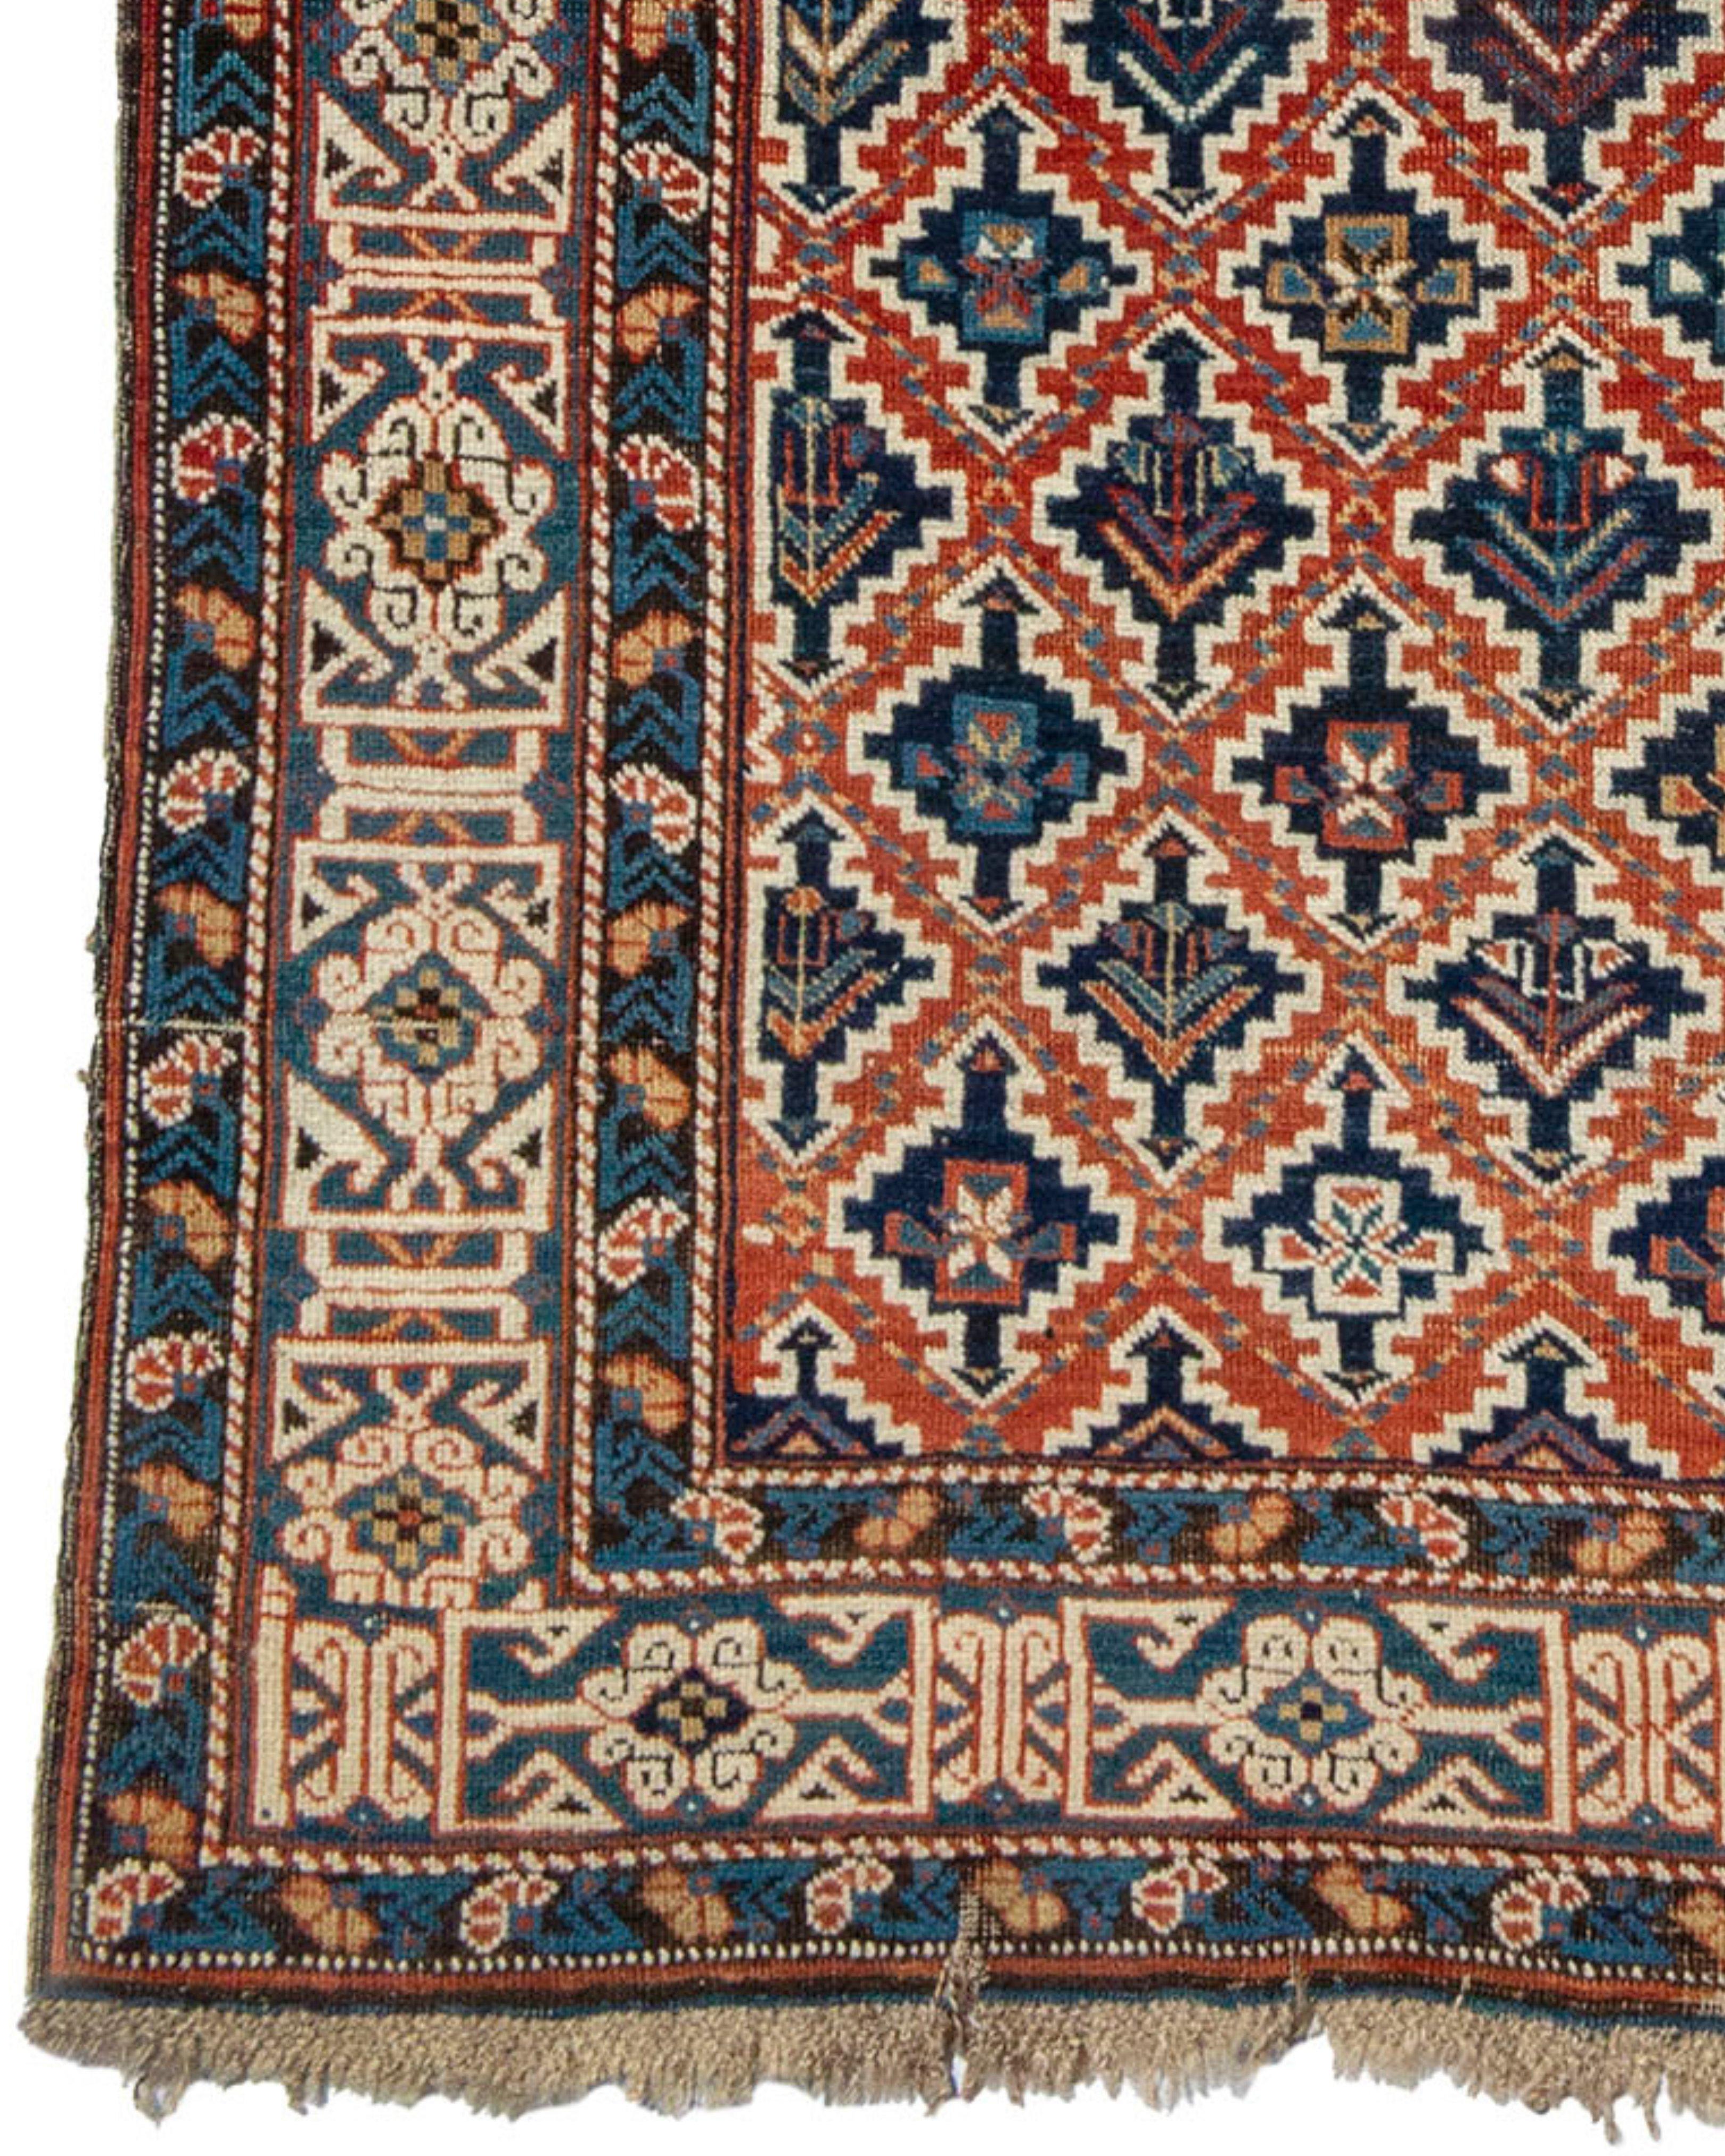 Hand-Knotted Antique Kuba Rug, Late 19th Century